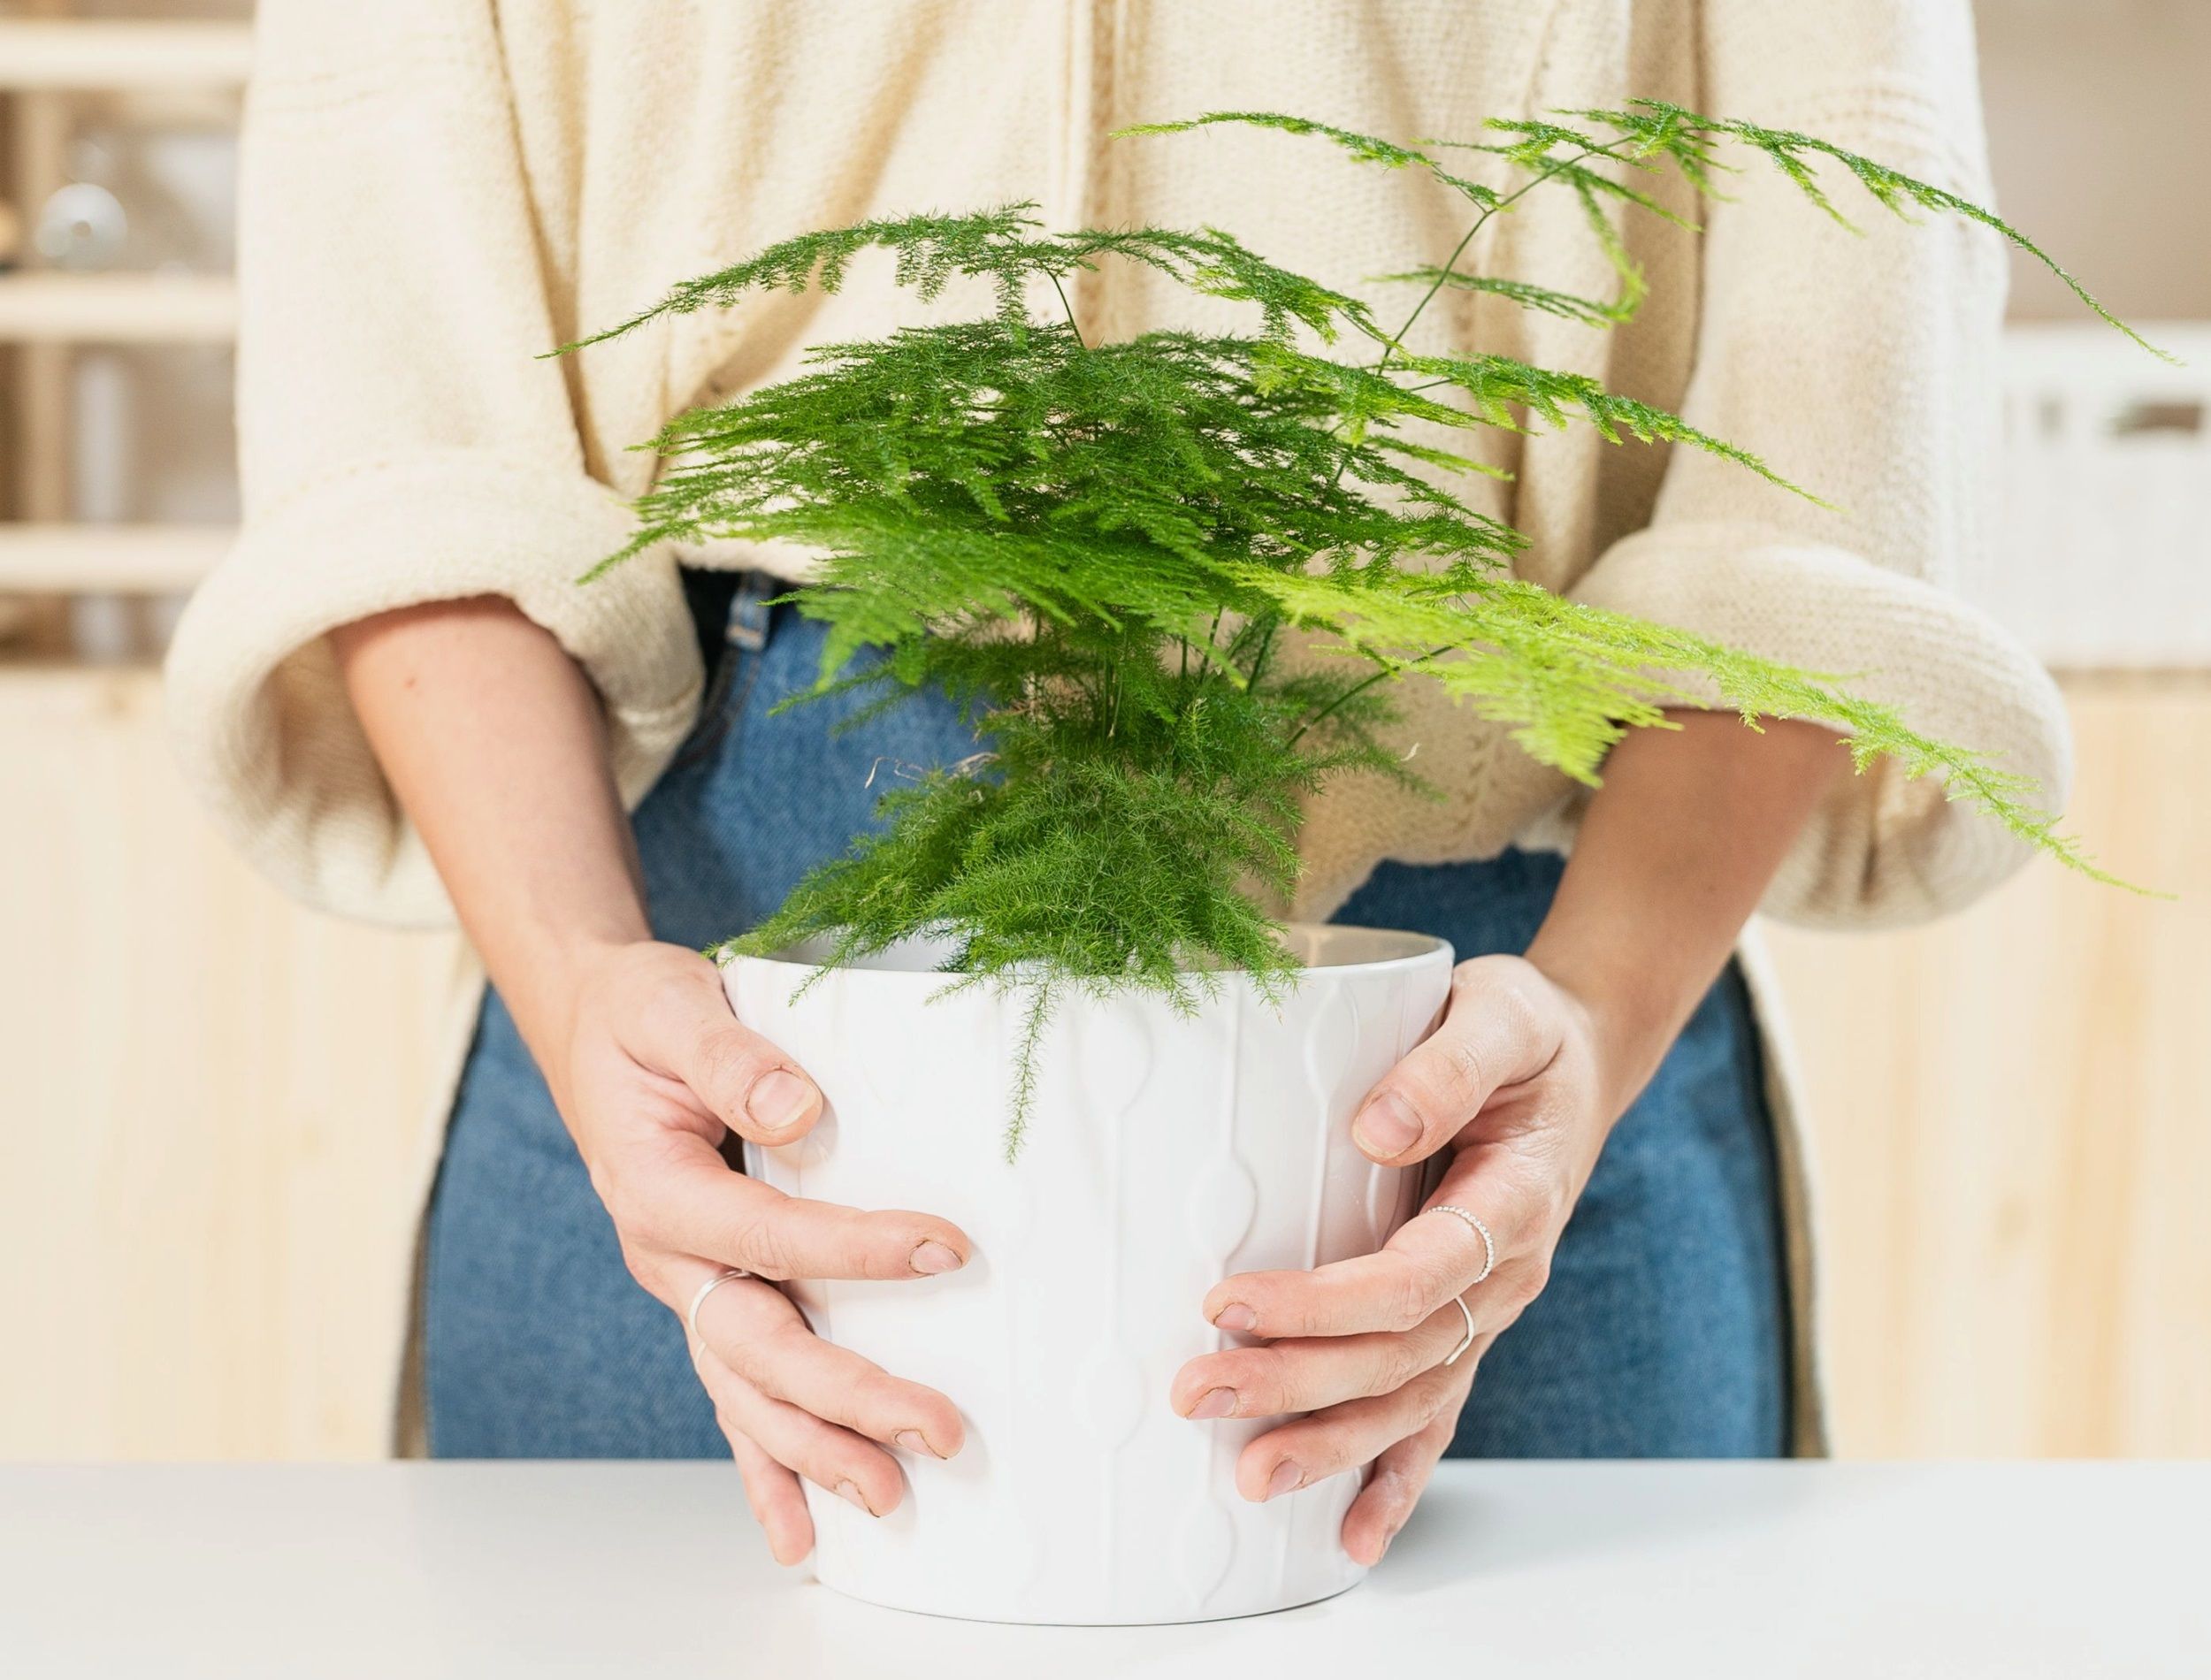 Young woman wearing rings in a minimal modern decor holding an asparagus fern plant in a white pot with a clear wood kitchen shelf in background.